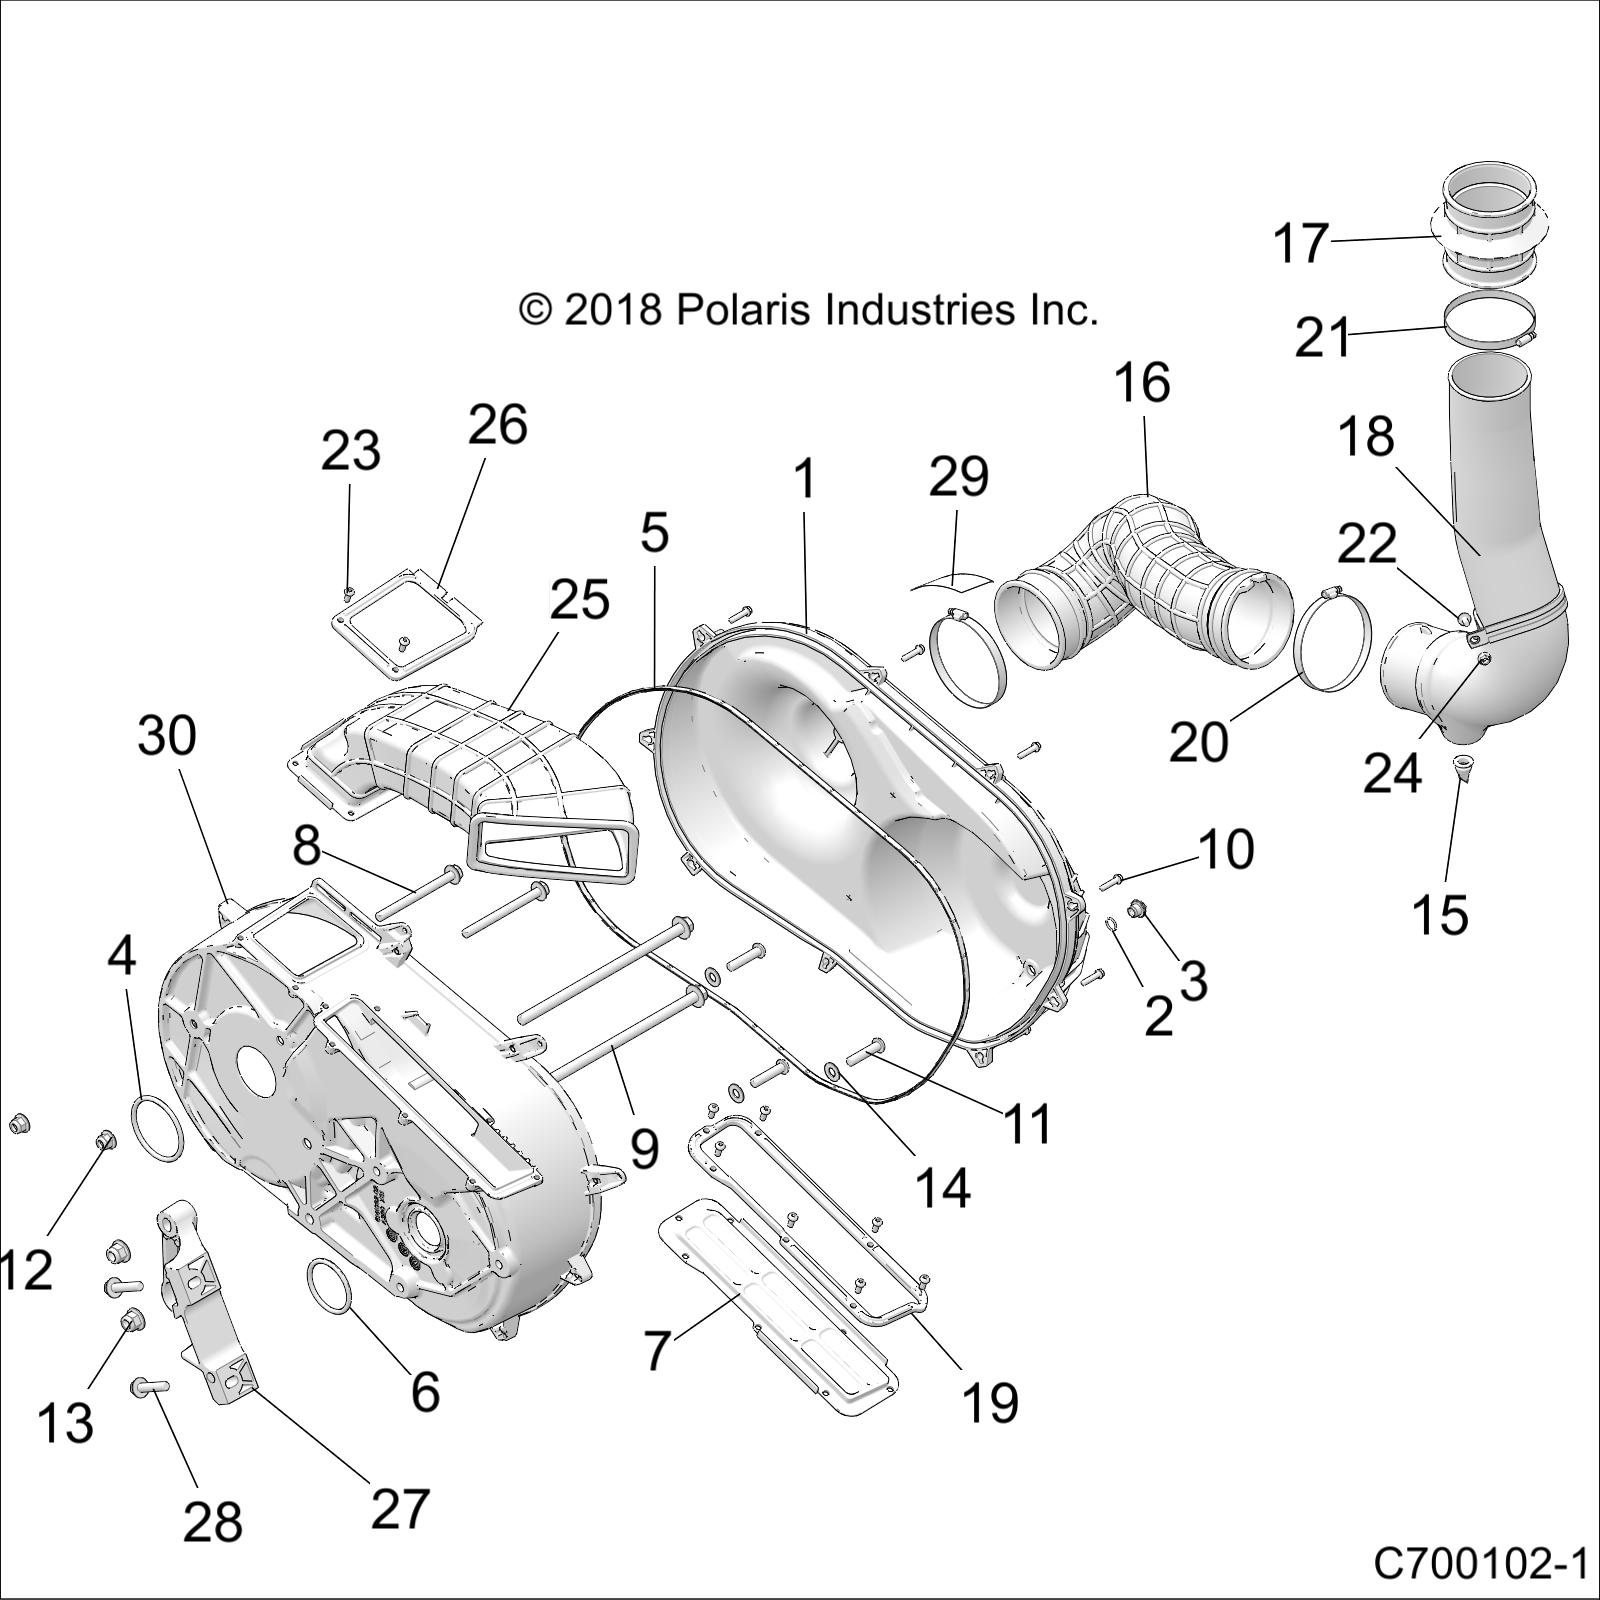 Part Number : 5416221 CLUTCH INTAKE BOOT